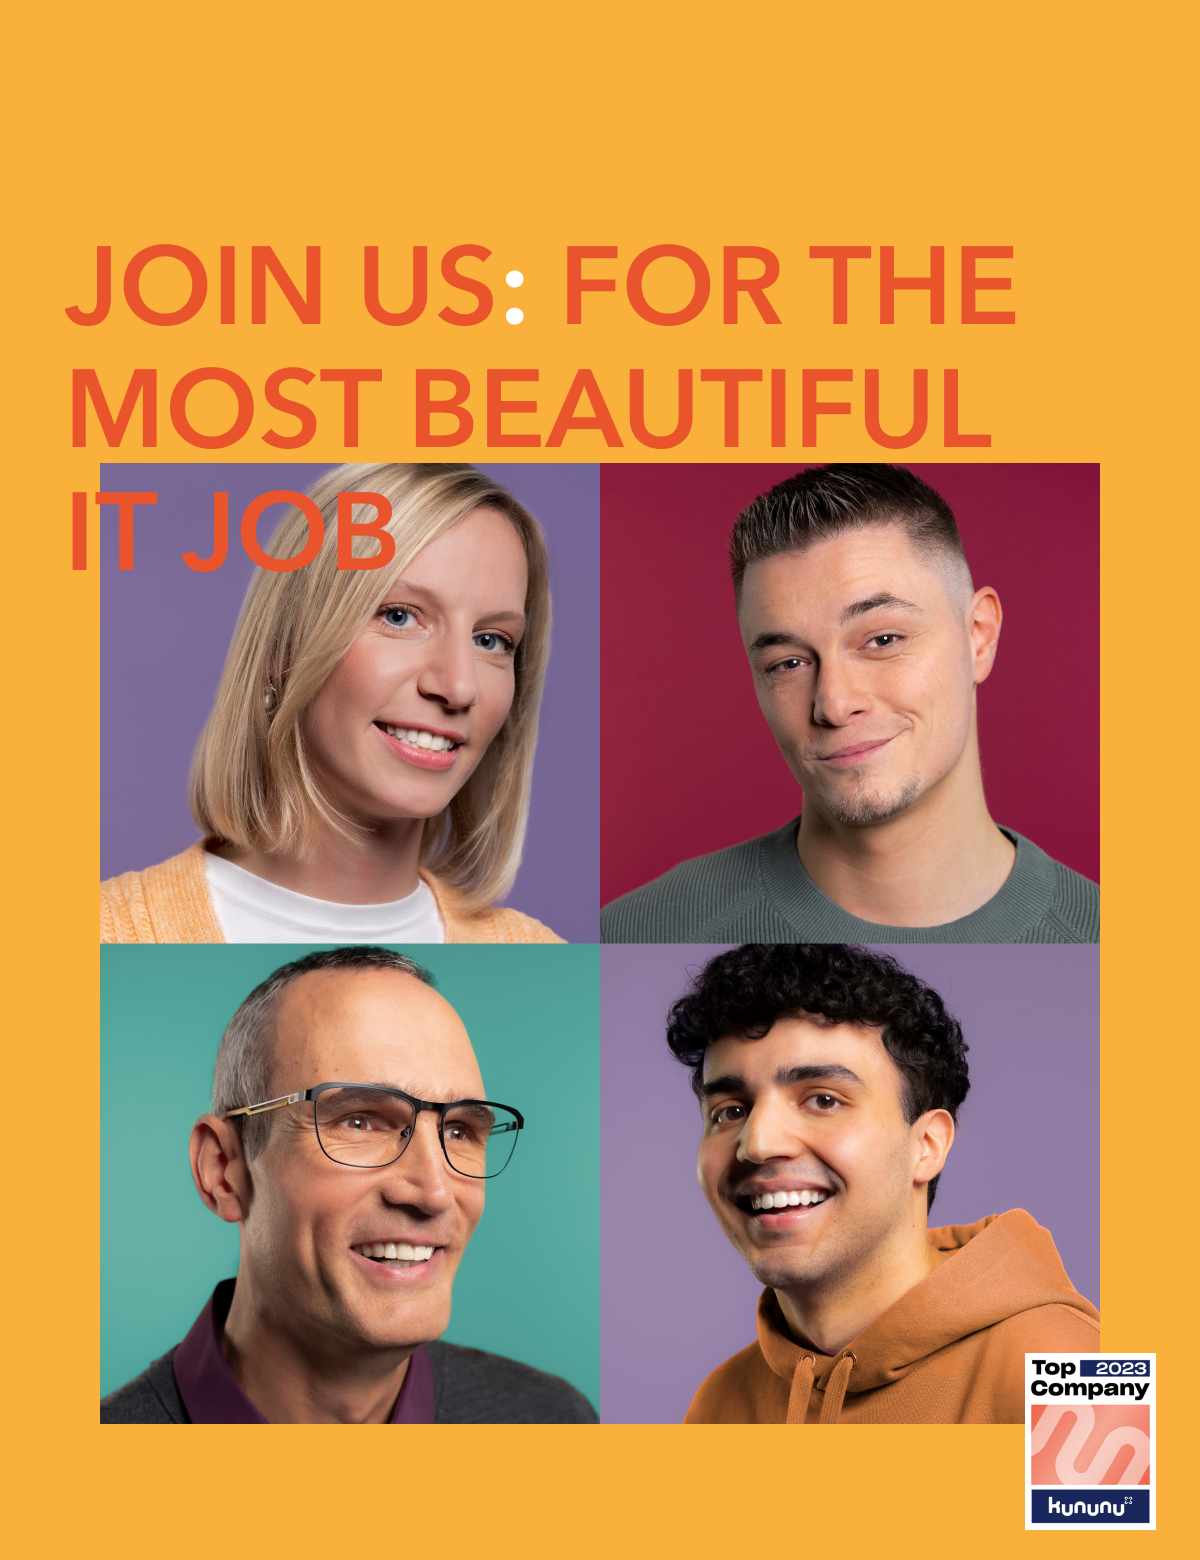 We offer: the most beautiful IT Job